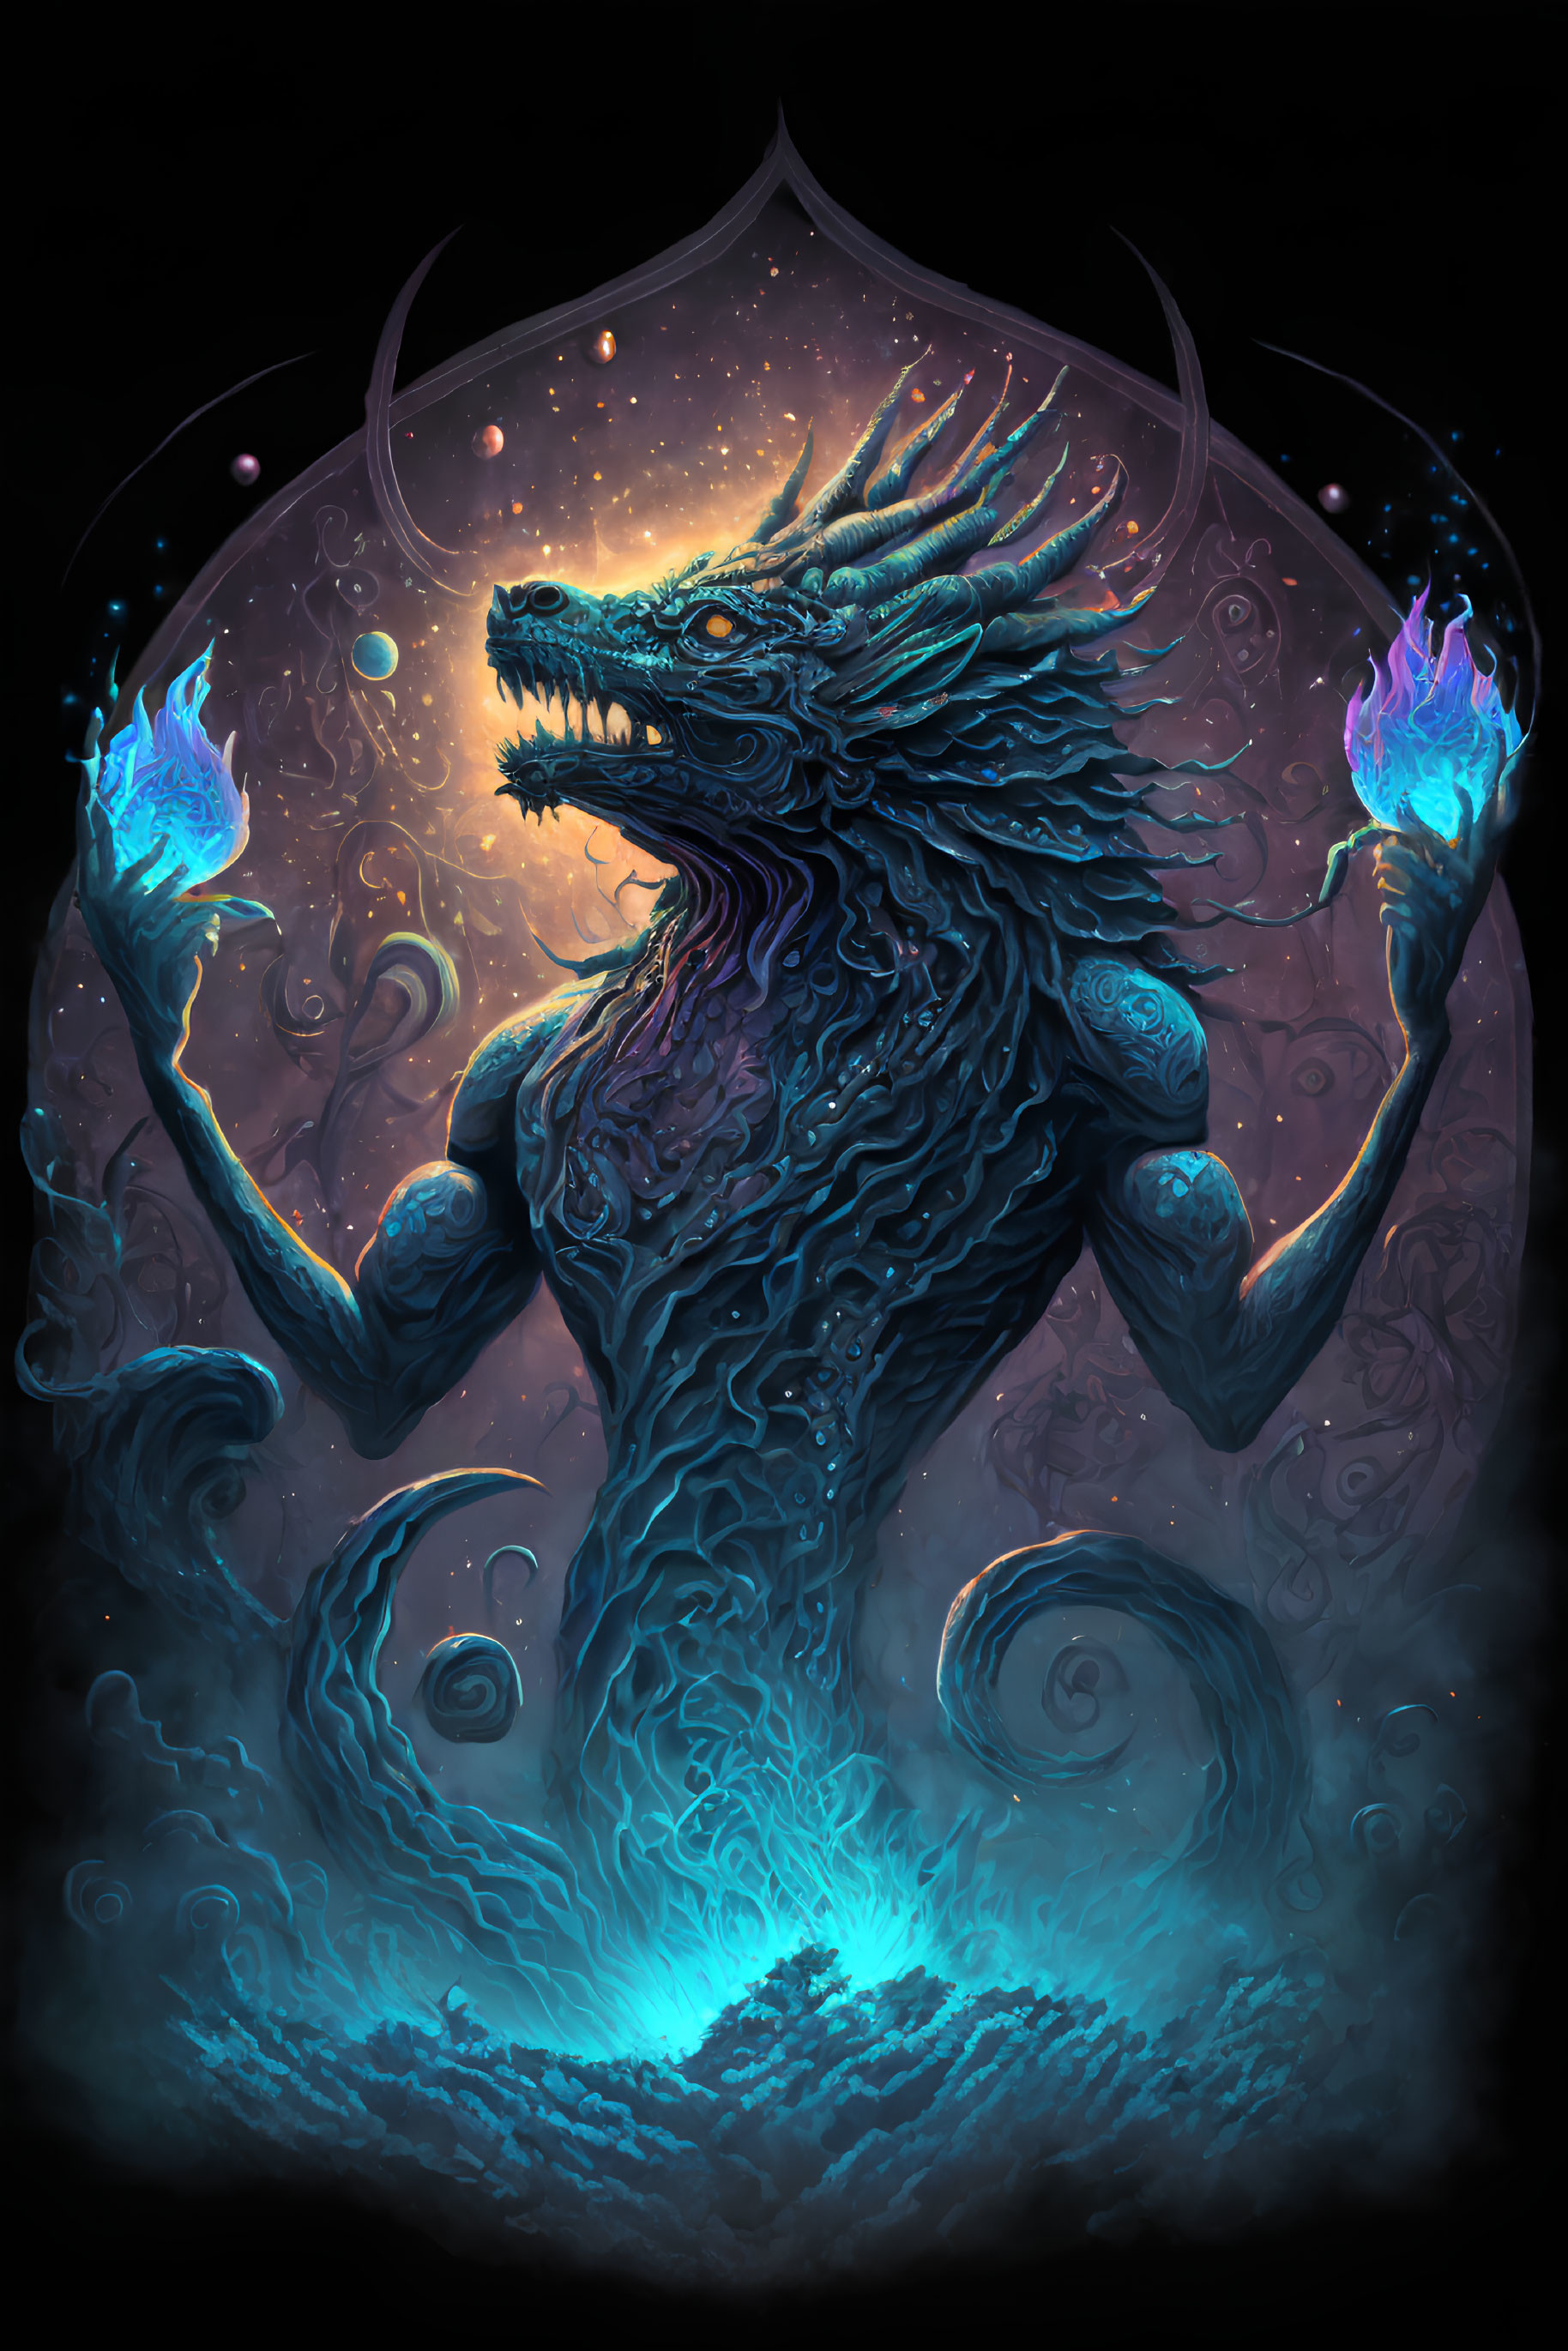 Mystical dragon-like creature with flames and water on dark background